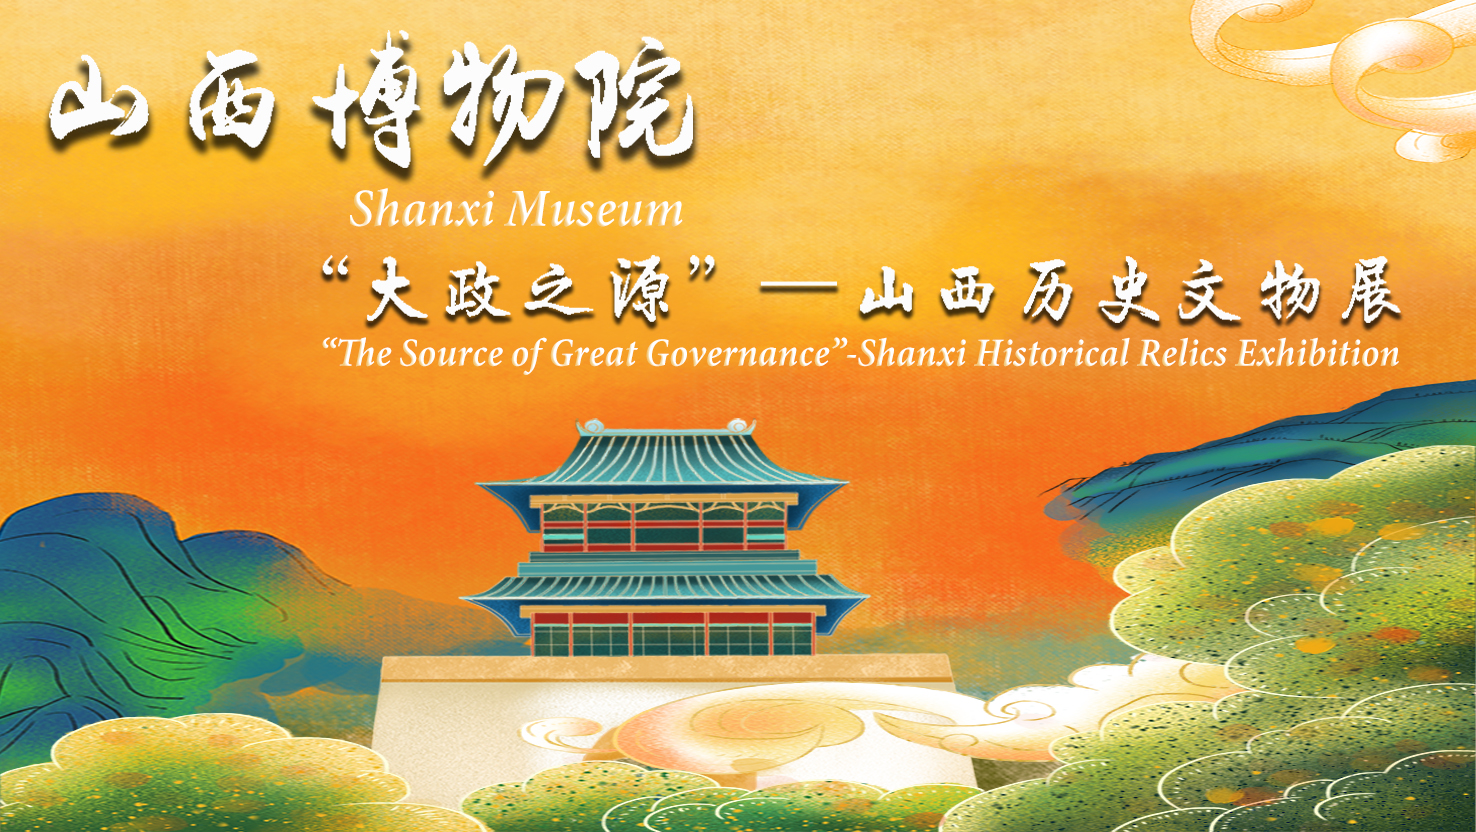 Shanxi Museum: “The Source of Great Governance”-Shanxi Historical Relics Exhibition